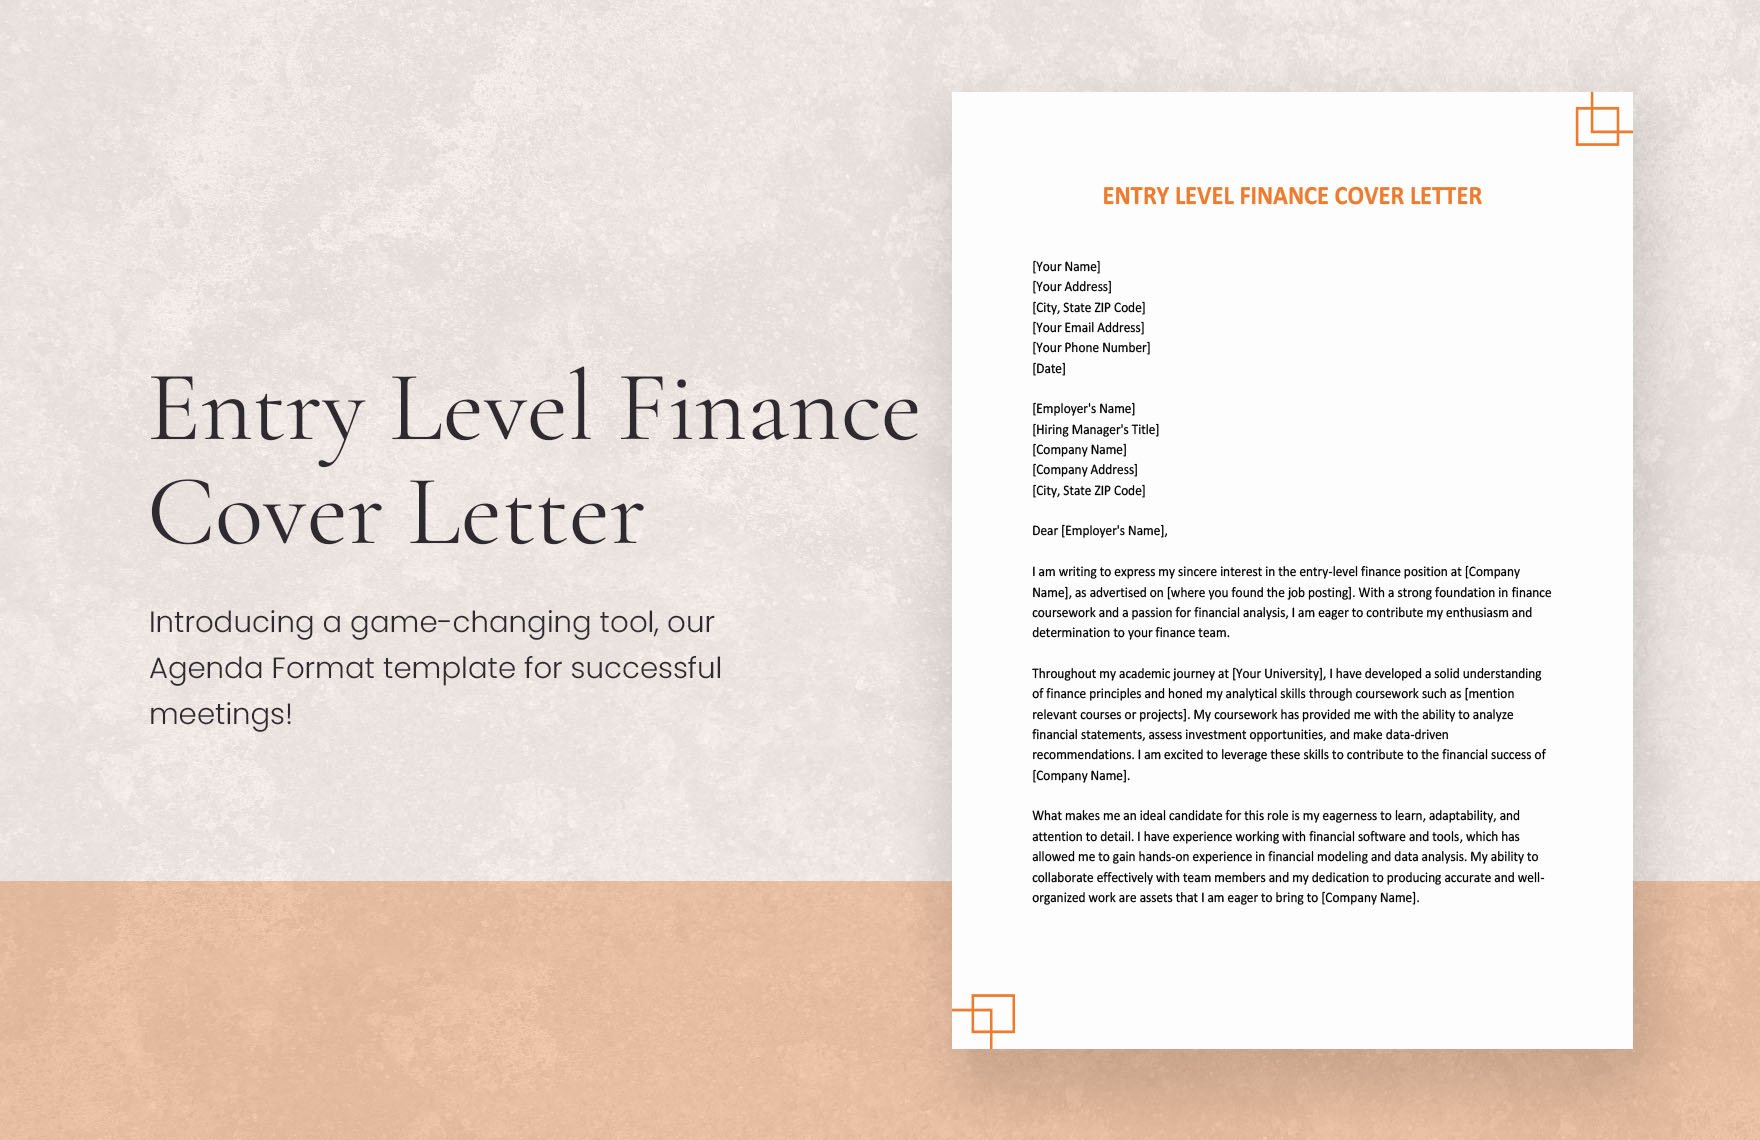 Entry Level Finance Cover Letter in Word, Google Docs